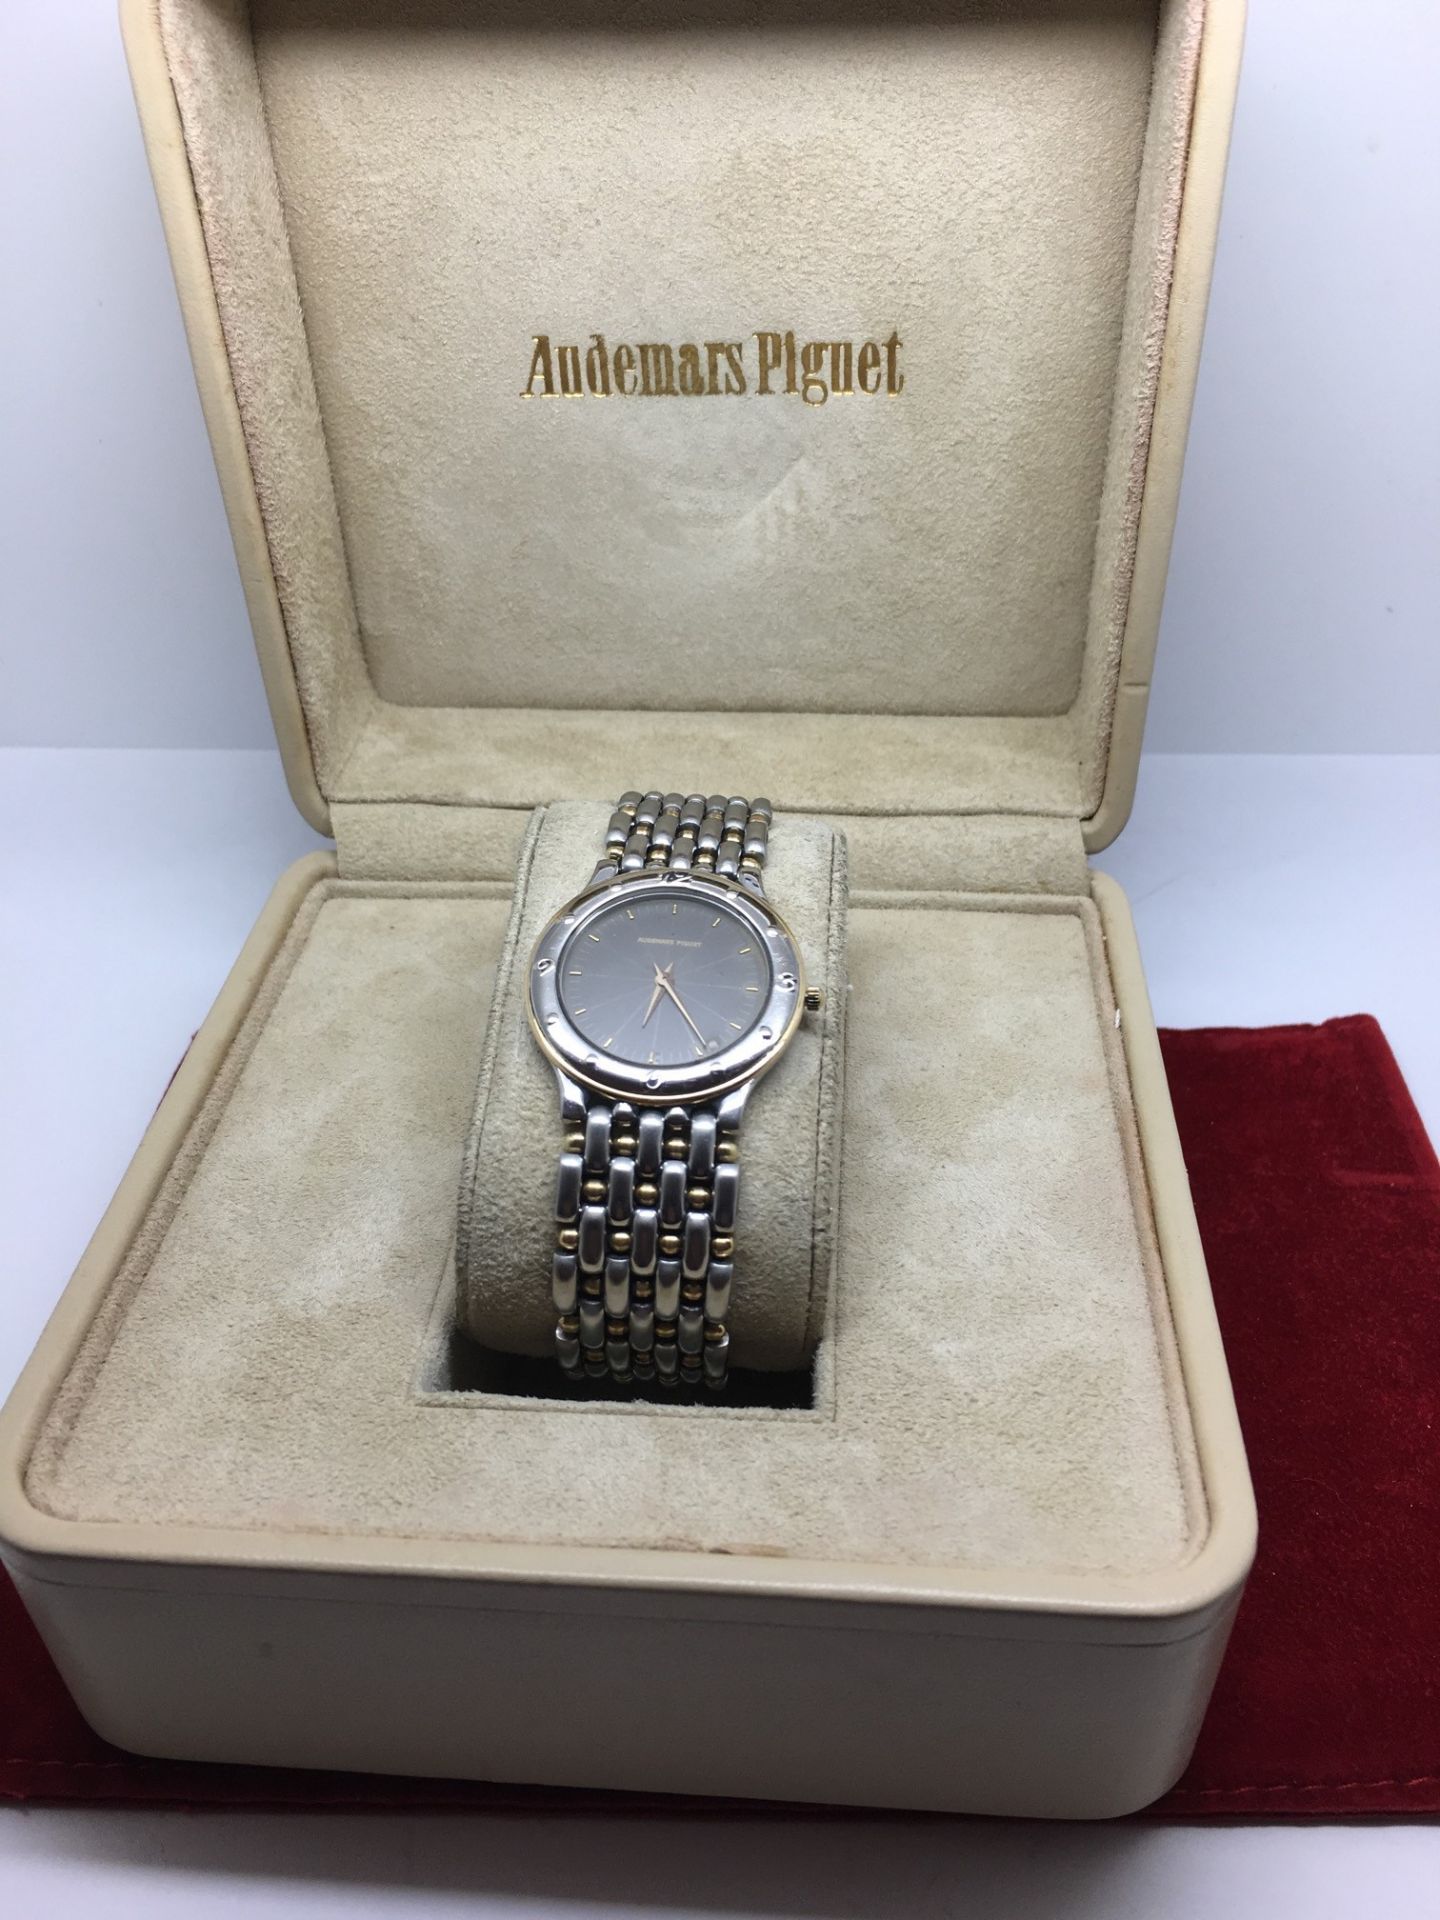 RARE AUDEMARS PIGUET SOLID GOLD & STAINLESS WATCH WITH BOX